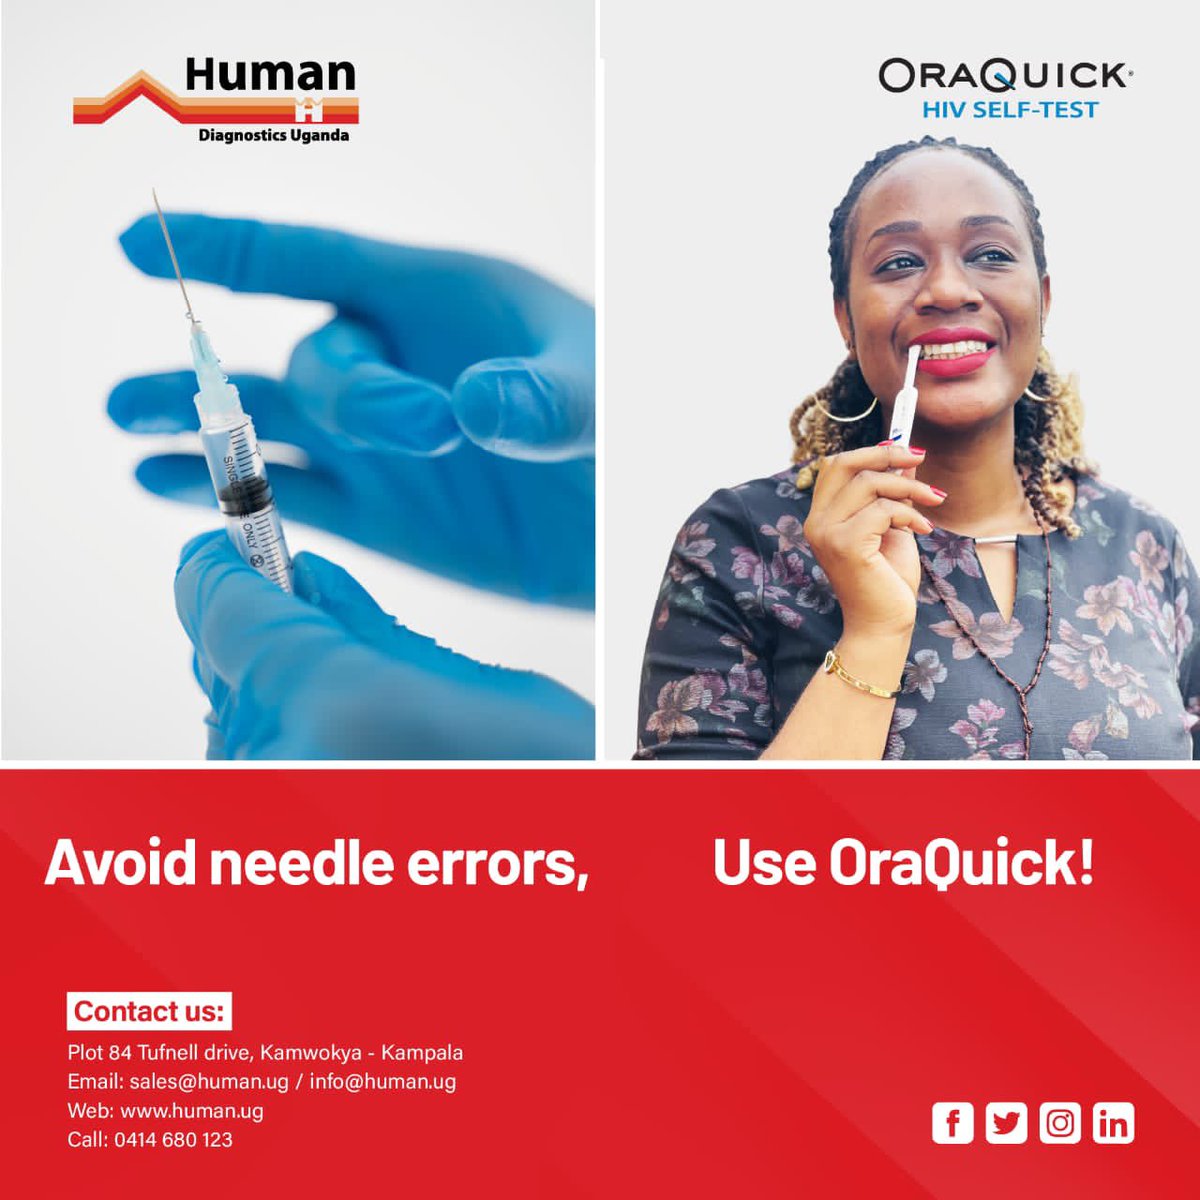 In order to have success test results with #OraQuickHIVSelfTest kits, make sure you test before eating food or drinking in the last 20 mins or more or after 20mins after tasting any food or drink.
#SRHR 
#HIV 
#TestBeforeYouTaste